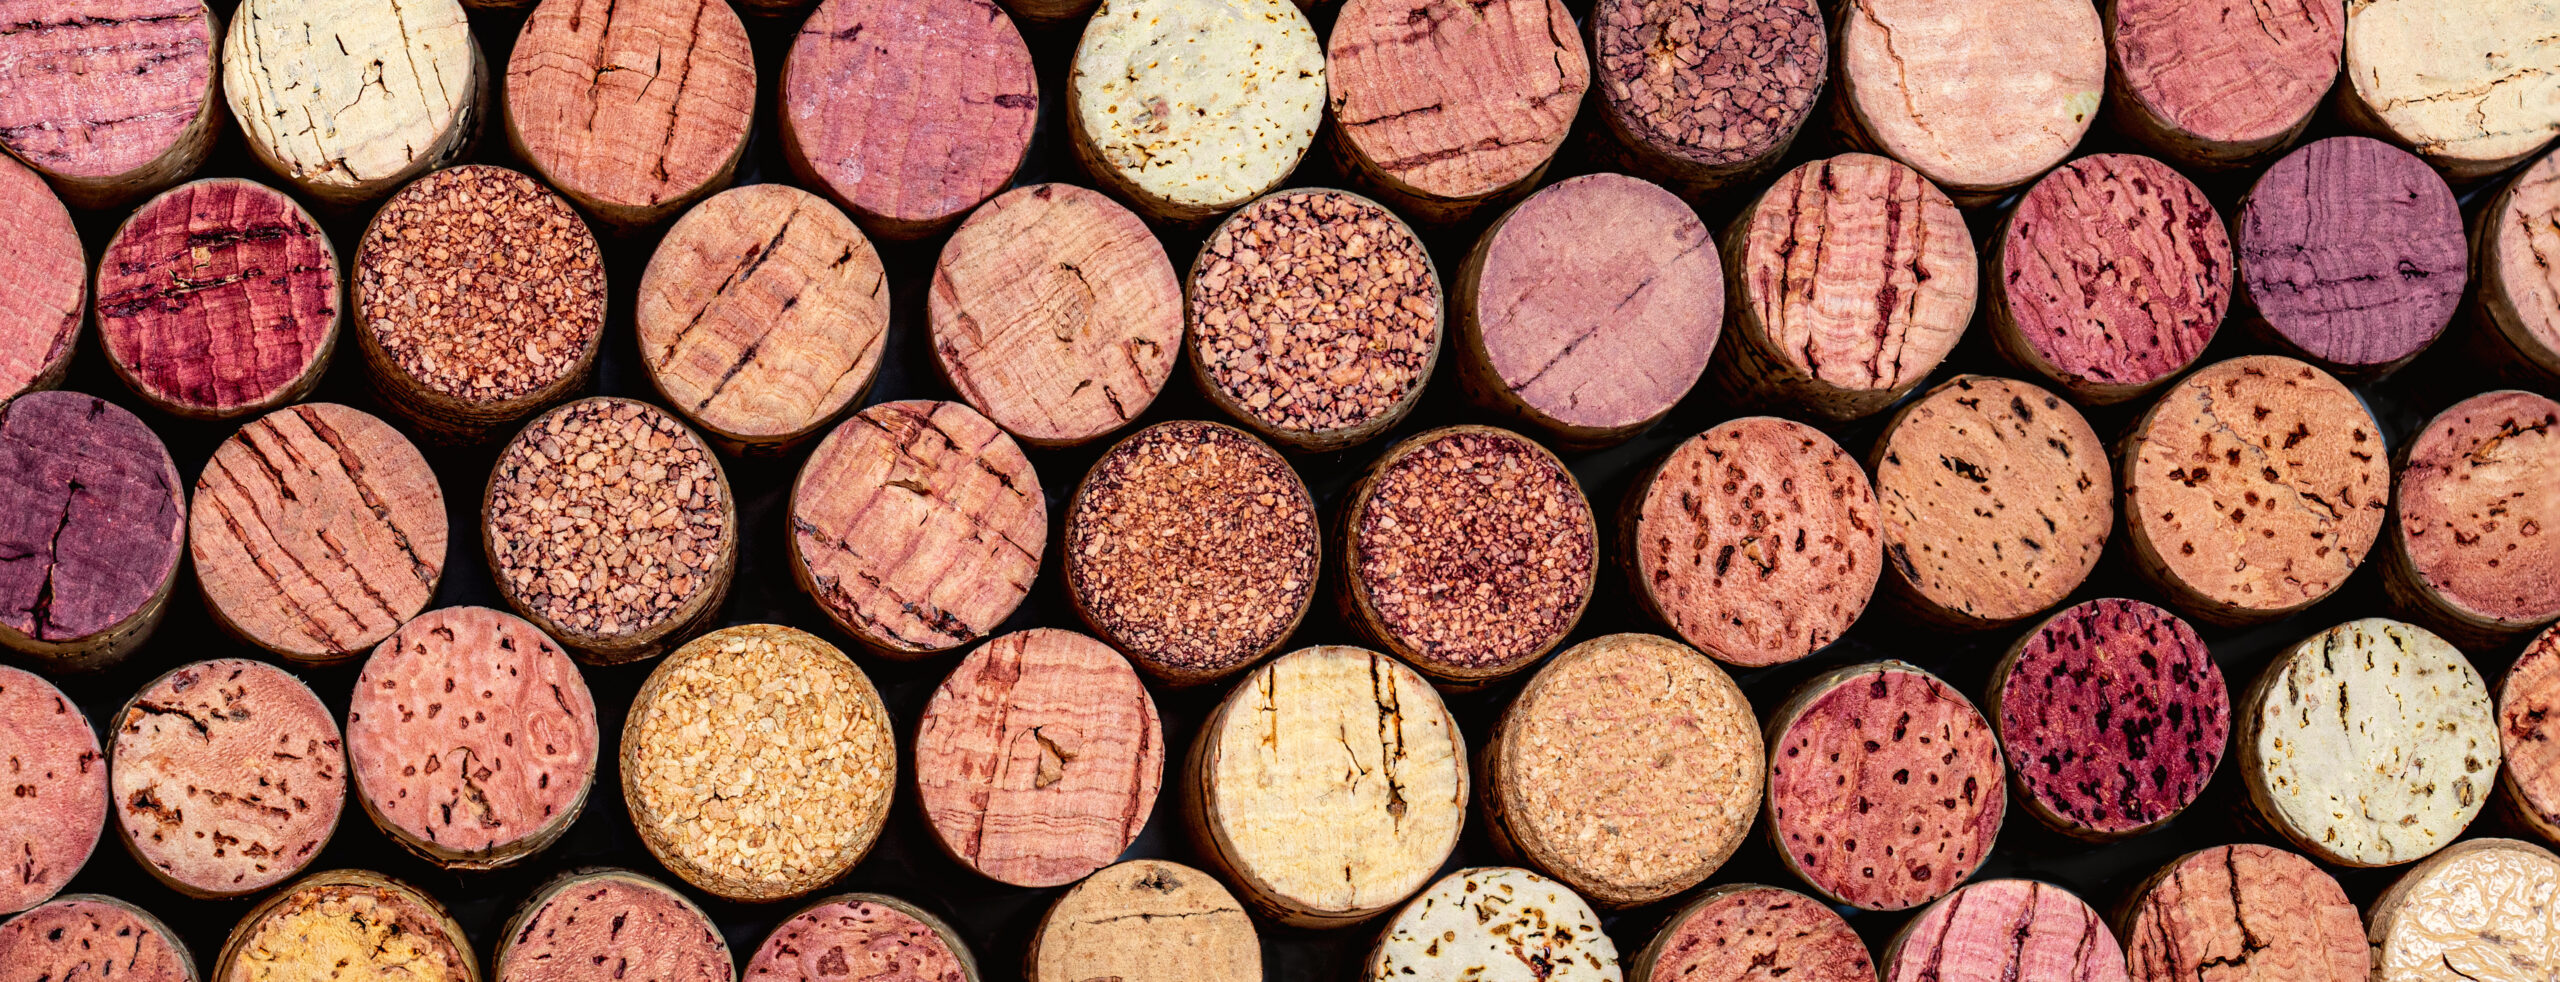 Wine corks Pattern. Various wooden wine corks  as a Background. Food and drink concept